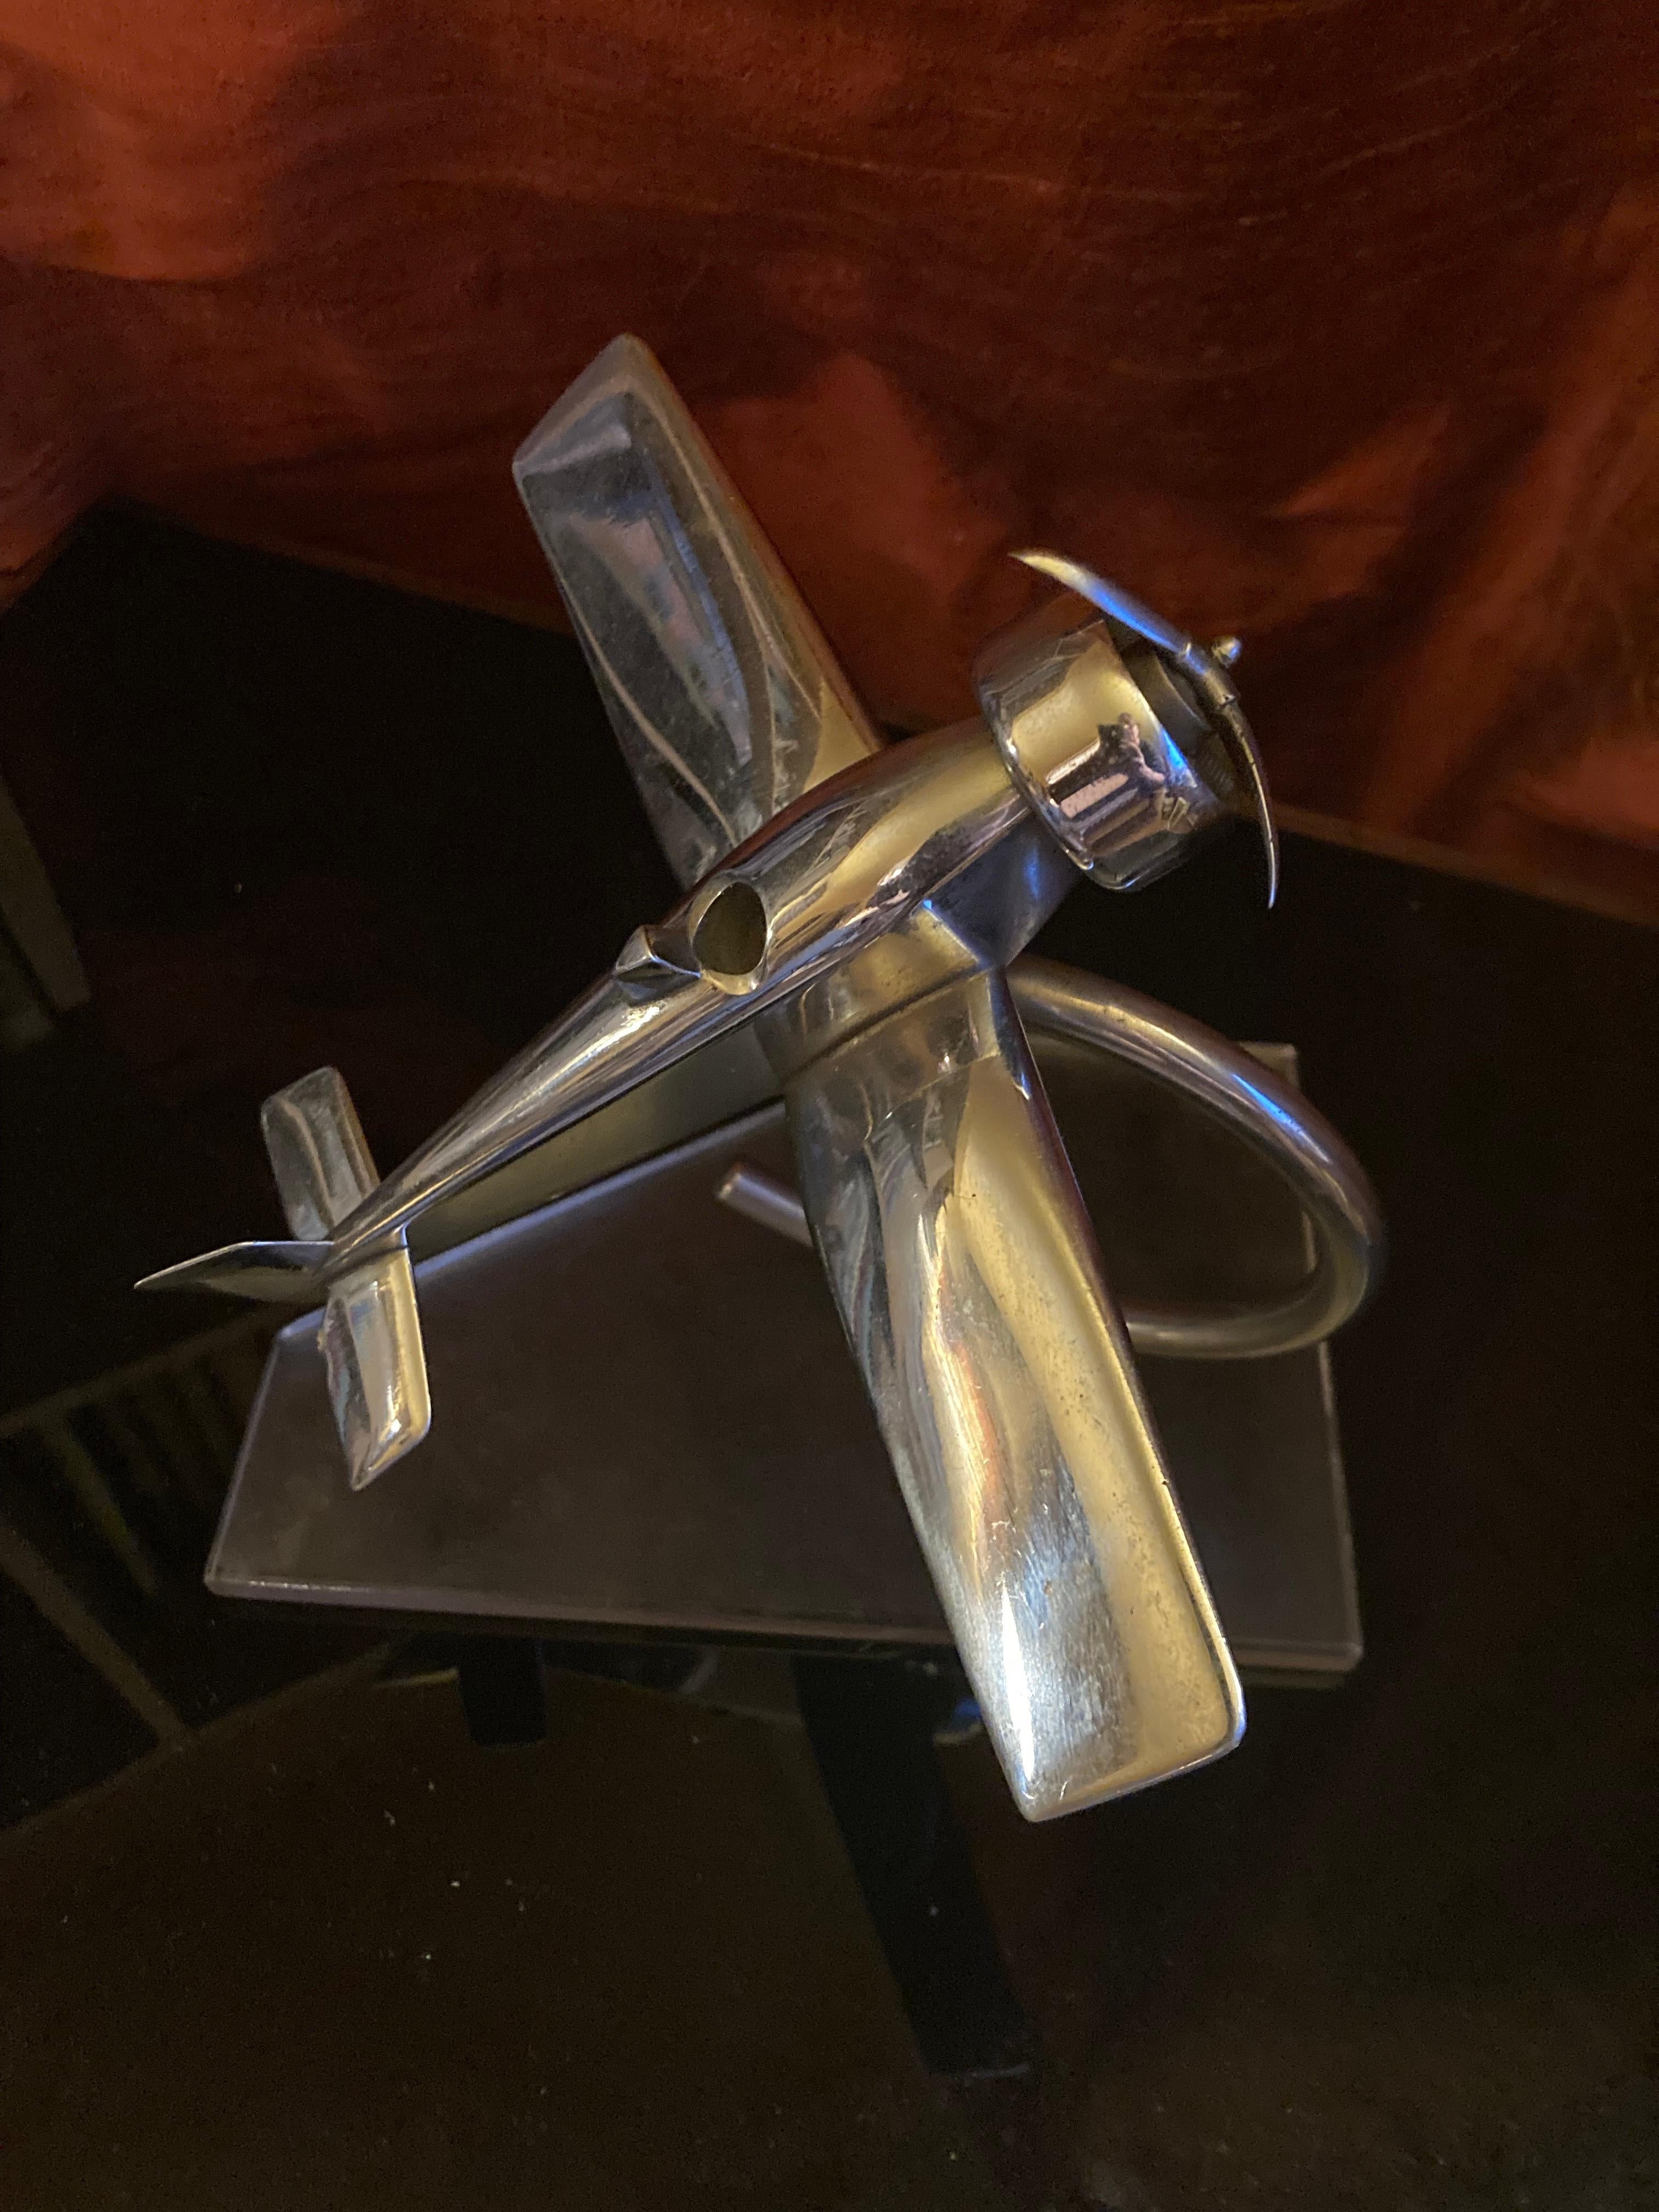 Decorative Art Deco chrome airplane on plastic base. Desk decoration. Probably Germany or France of the thirties. The plastic plate is also from the time. Good general condition with very slight signs of use commensurate with age. The front